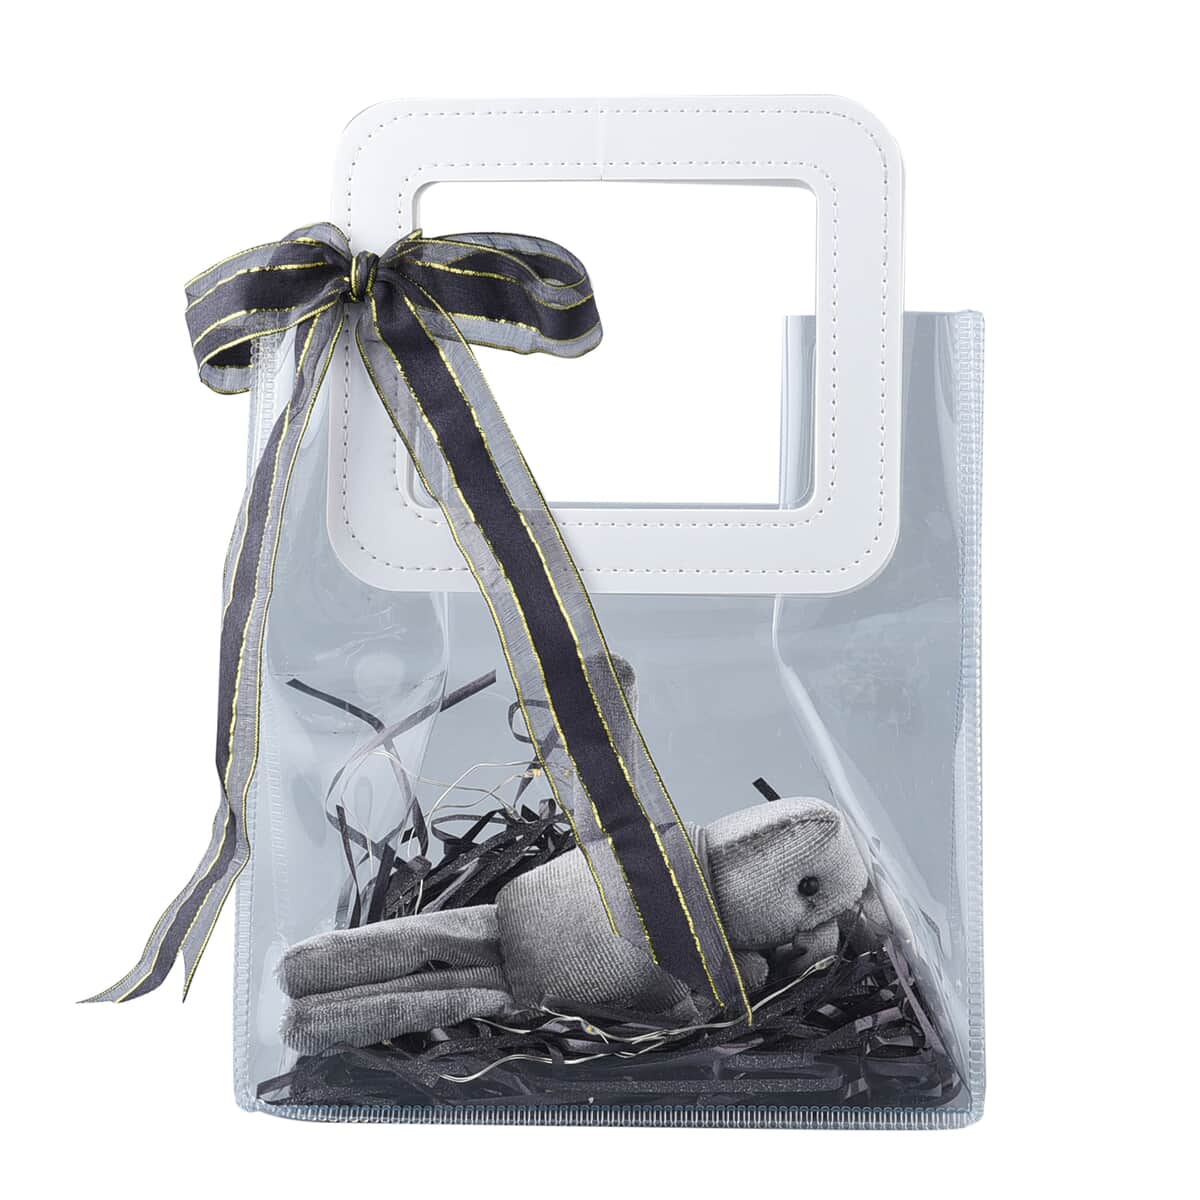 Black Gift Bag with Little Rabbit Doll, Ambient Lighting and Raffia (6.89"x3.74"x7.68") image number 0